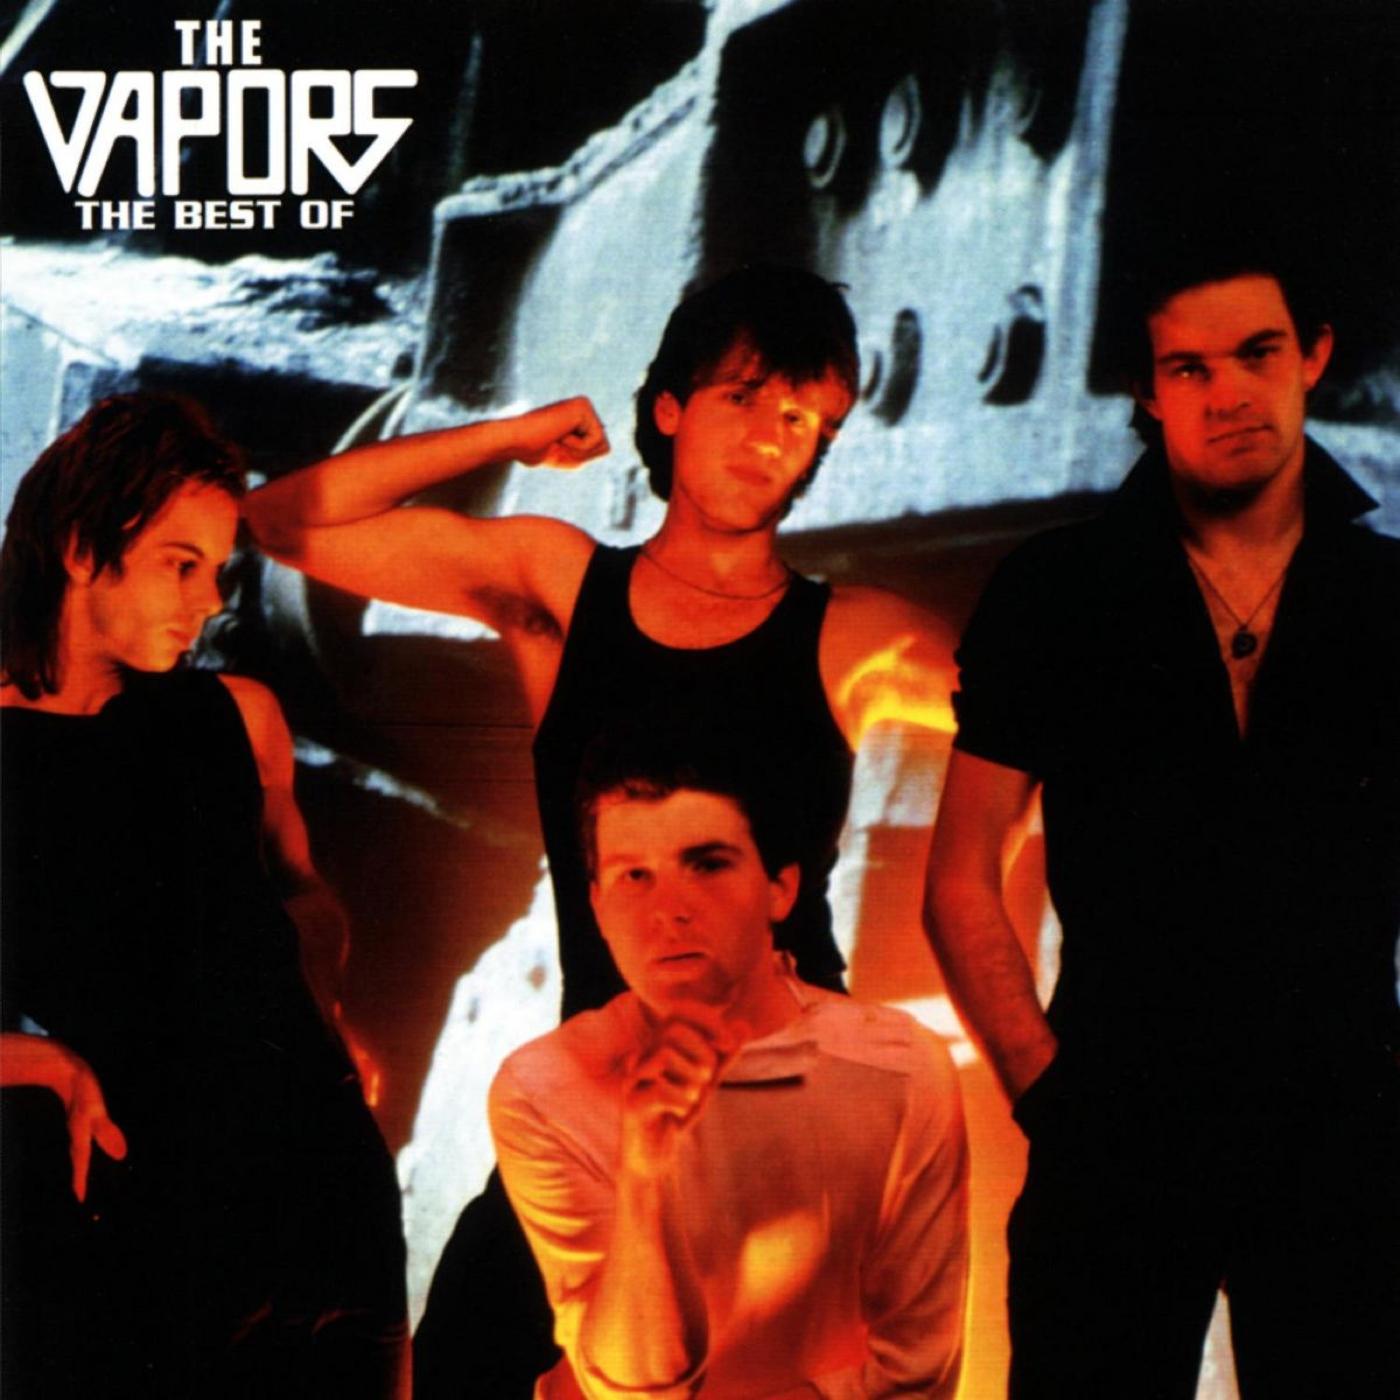 The Vapors - Waiting For The Weekend (Single Version)